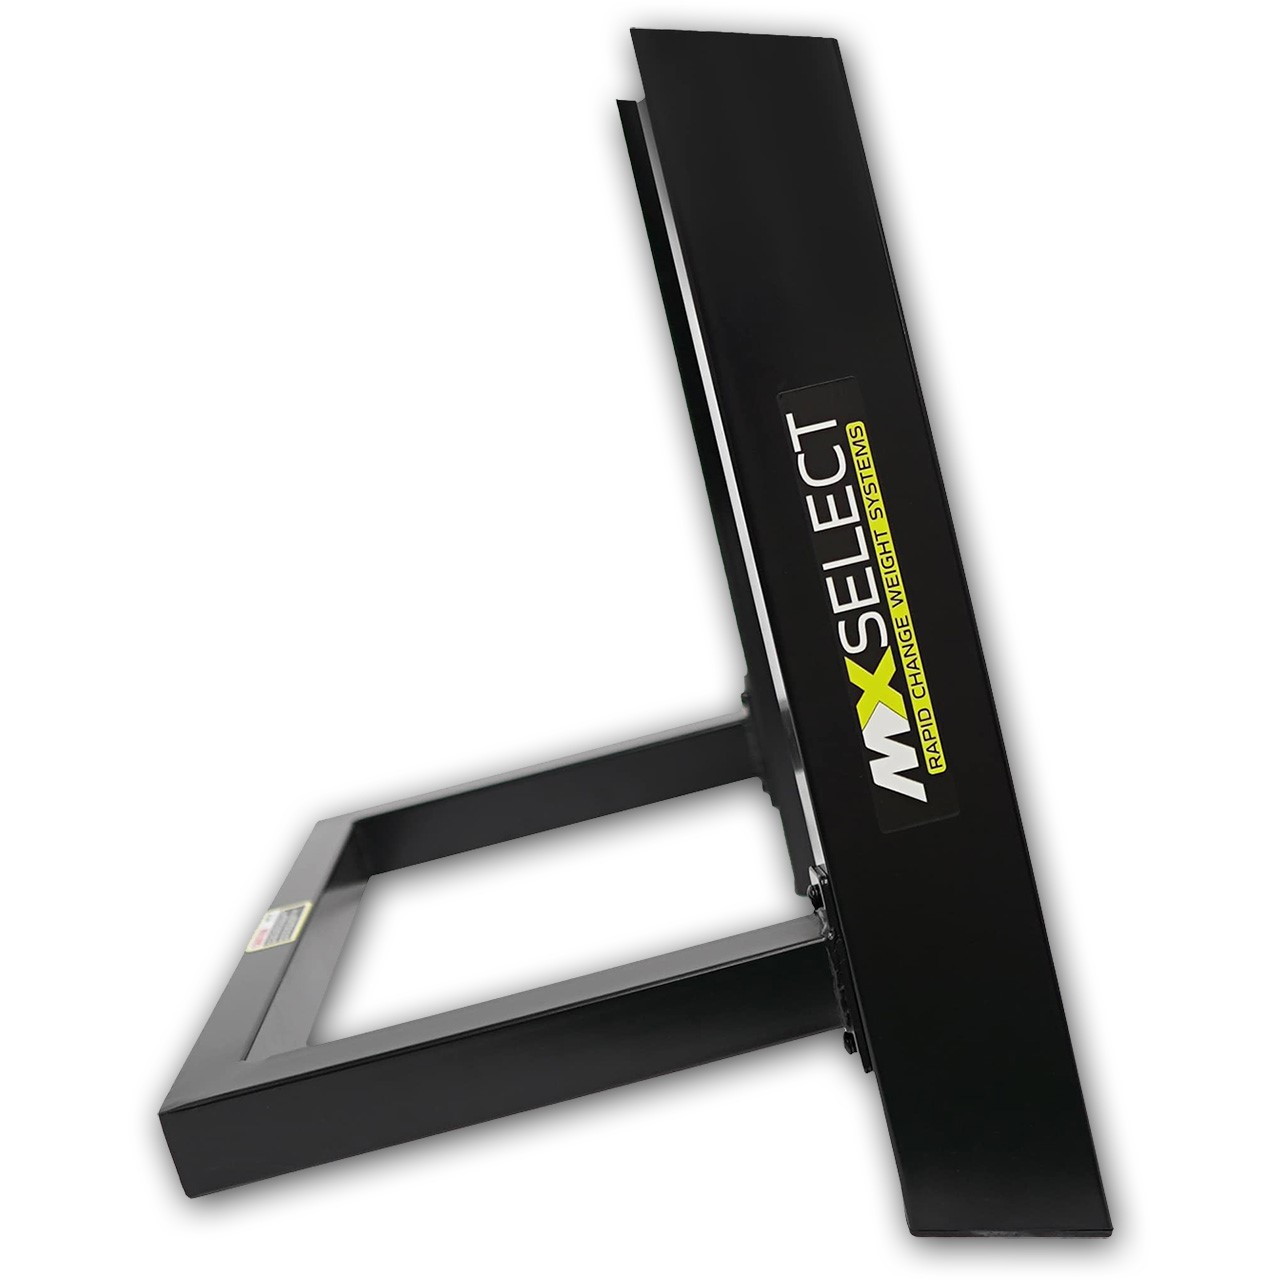 MX Select Dumbbells Stand